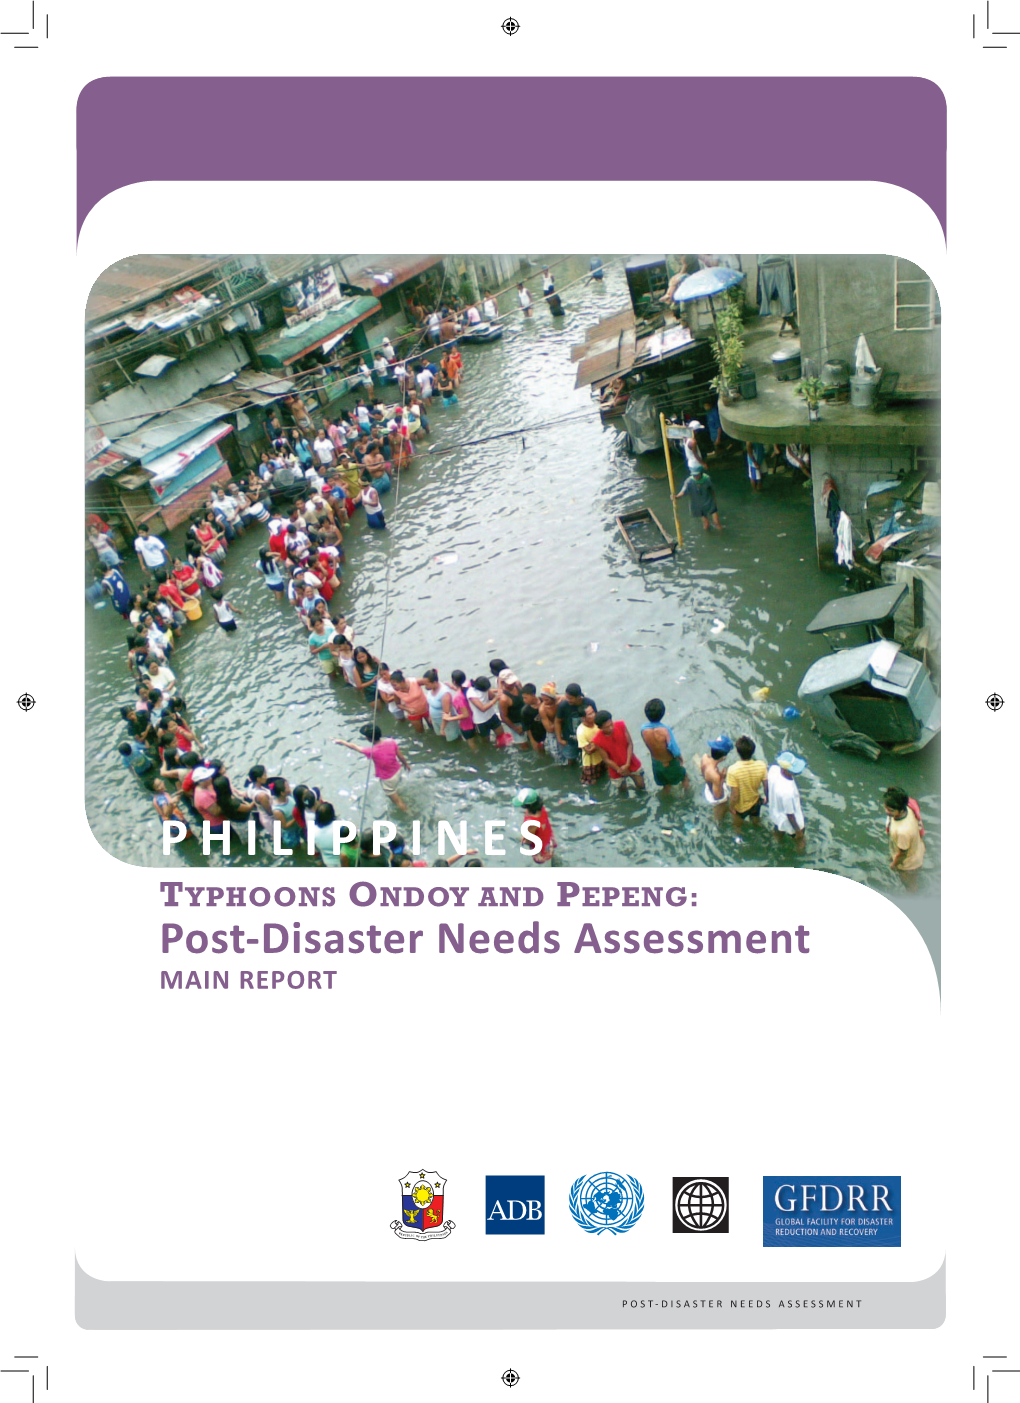 PHILIPPINES TYPHOONS ONDOY and PEPENG: Post-Disaster Needs Assessment MAIN REPORT